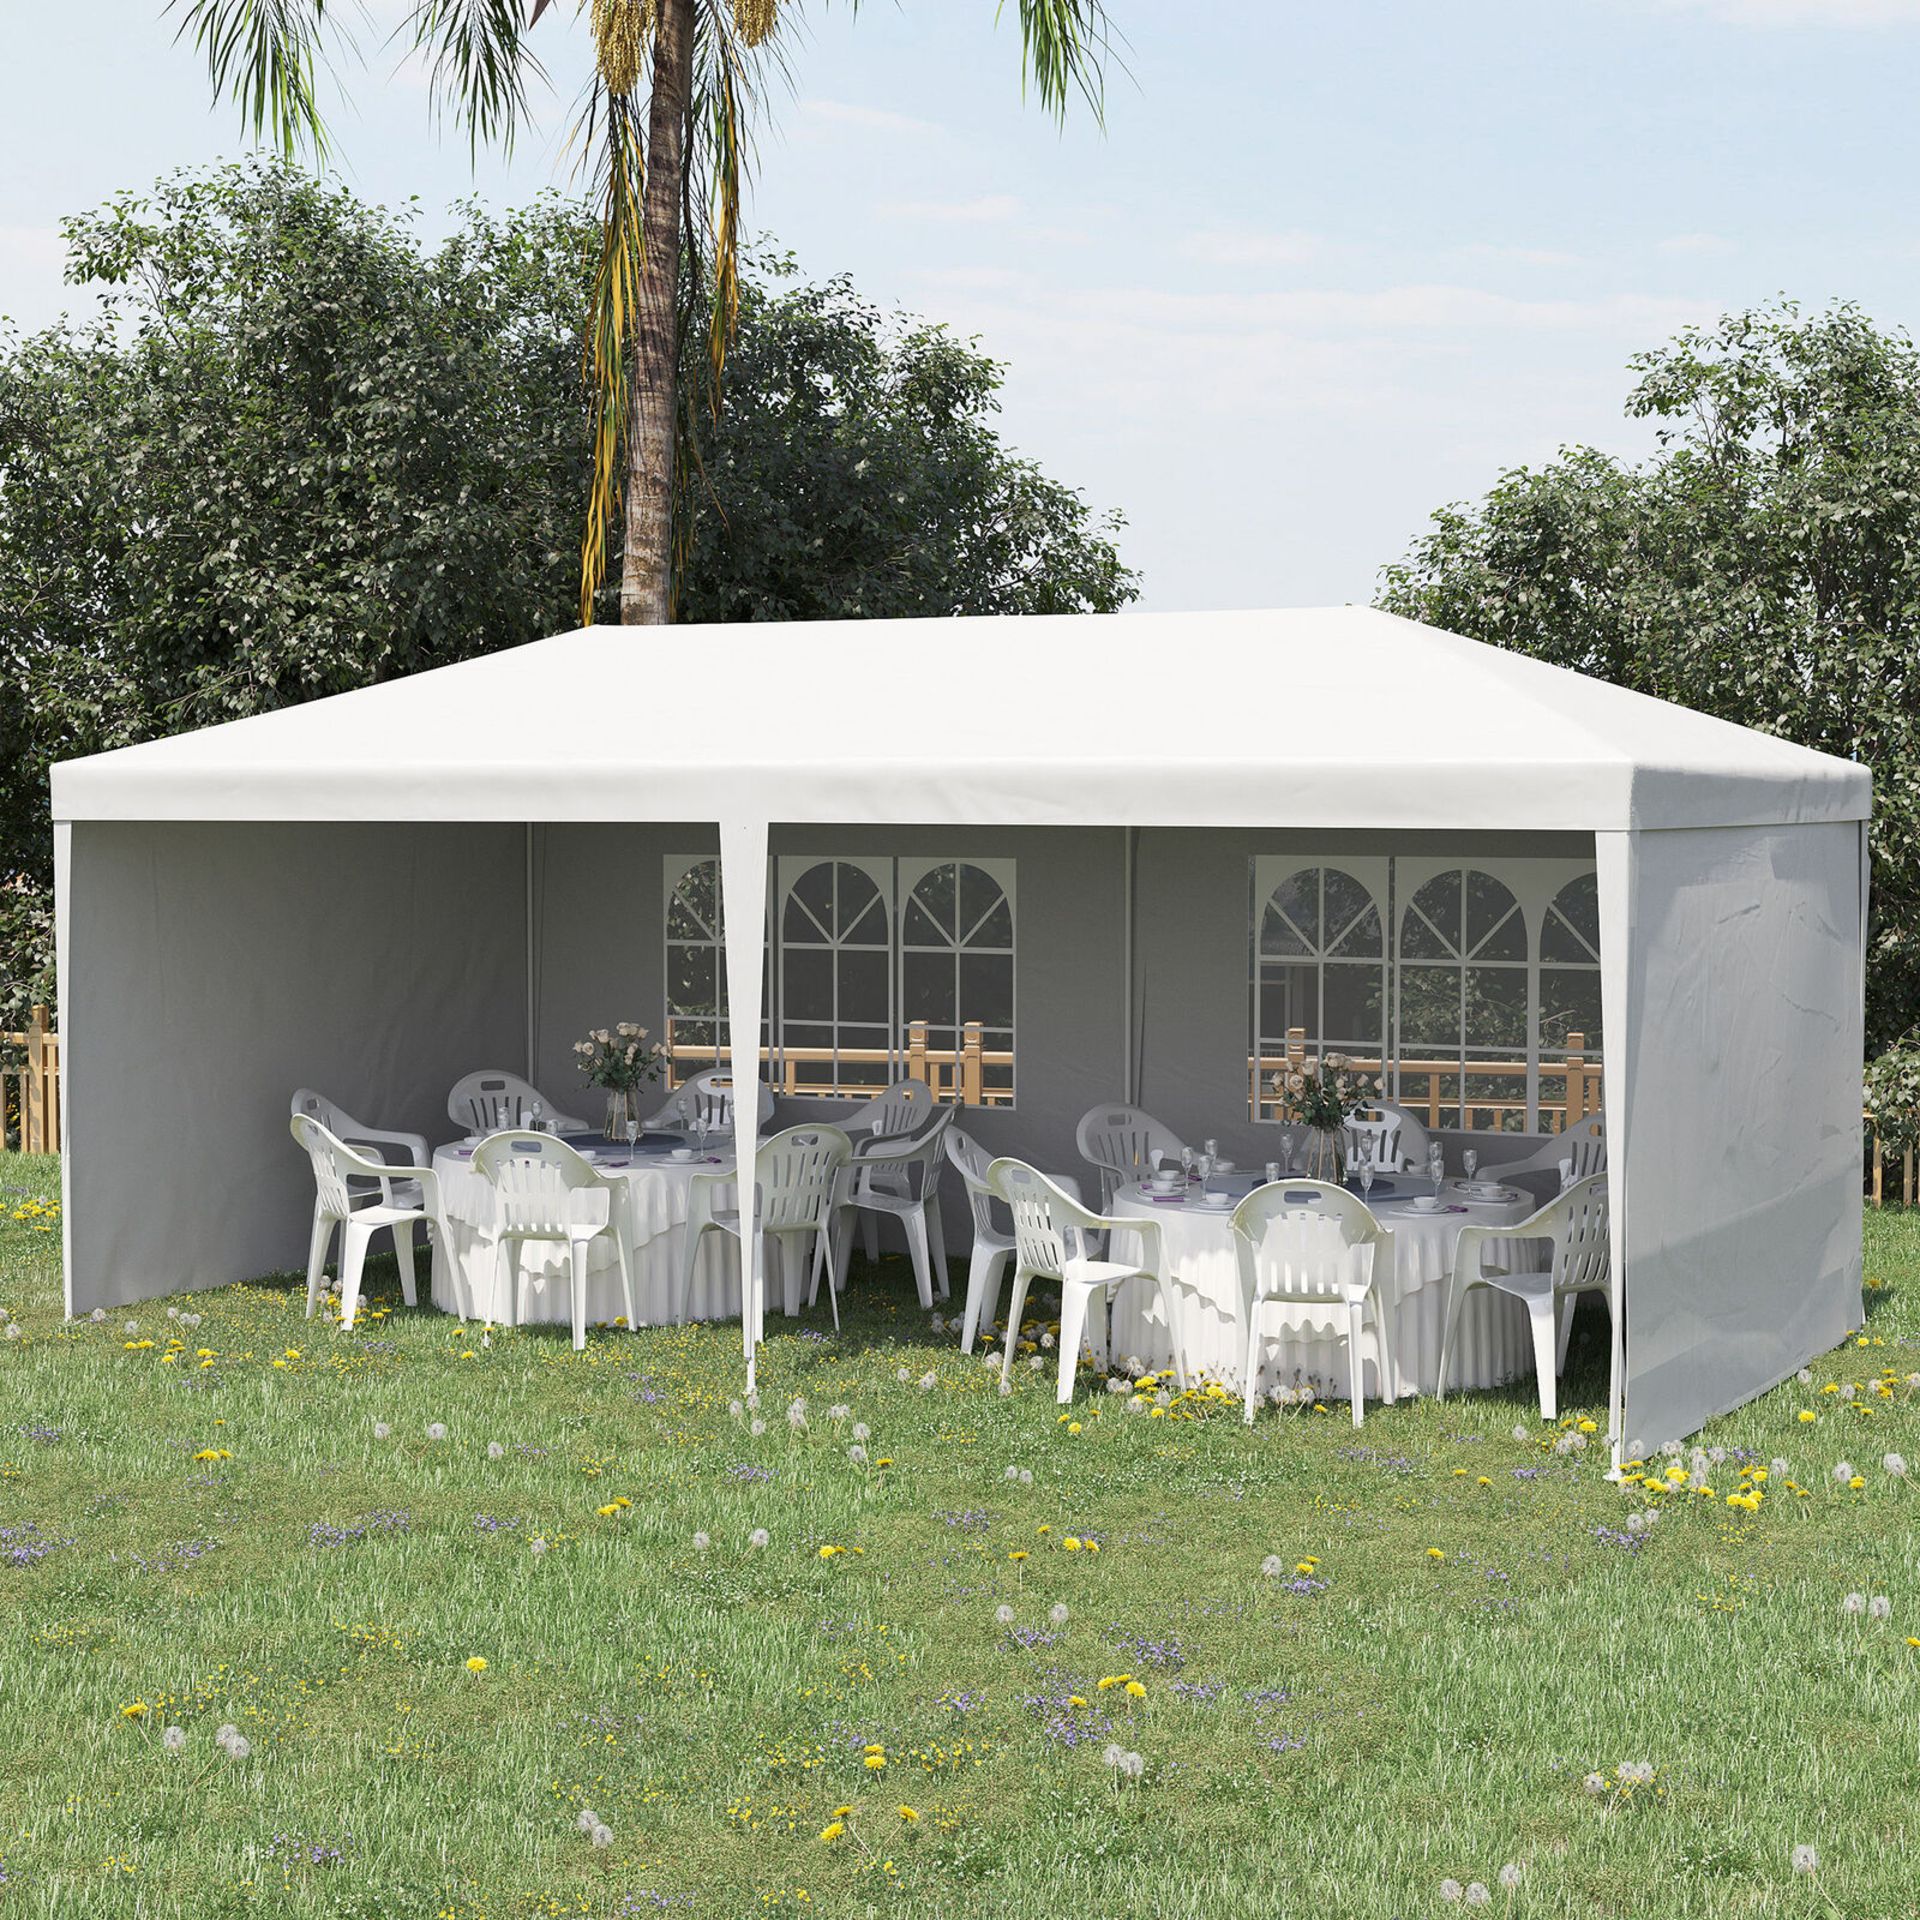 1 X TESCO OUTDOOR PARTY GAZEBO 3M X 6M IN ORIGINAL BOX - STOCK IMAGE FOR INDICATION OF SIZE ONLY - Image 2 of 5